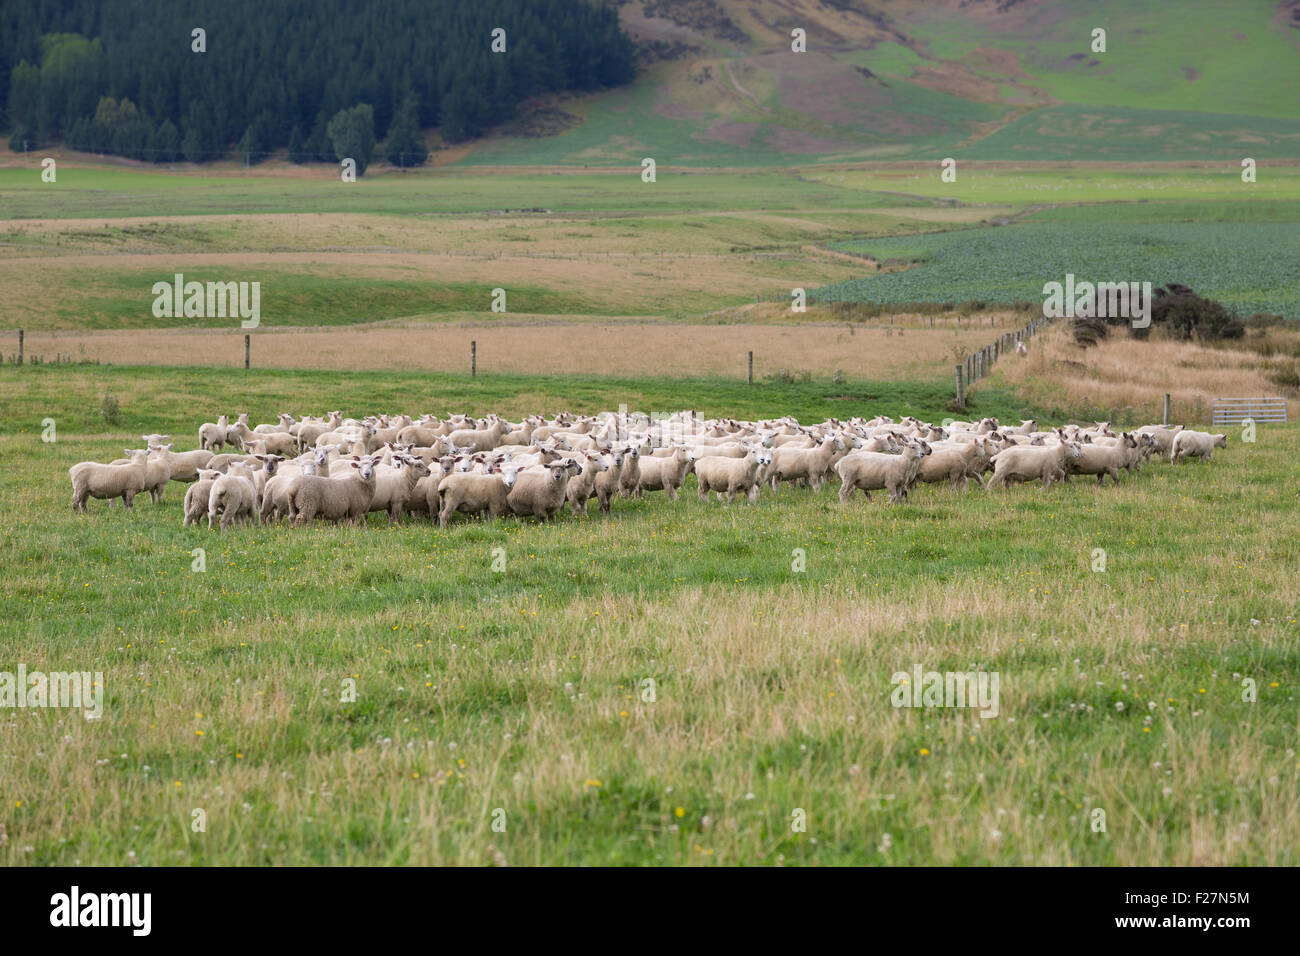 A free range flock of sheep on a farm in New Zealand Stock Photo